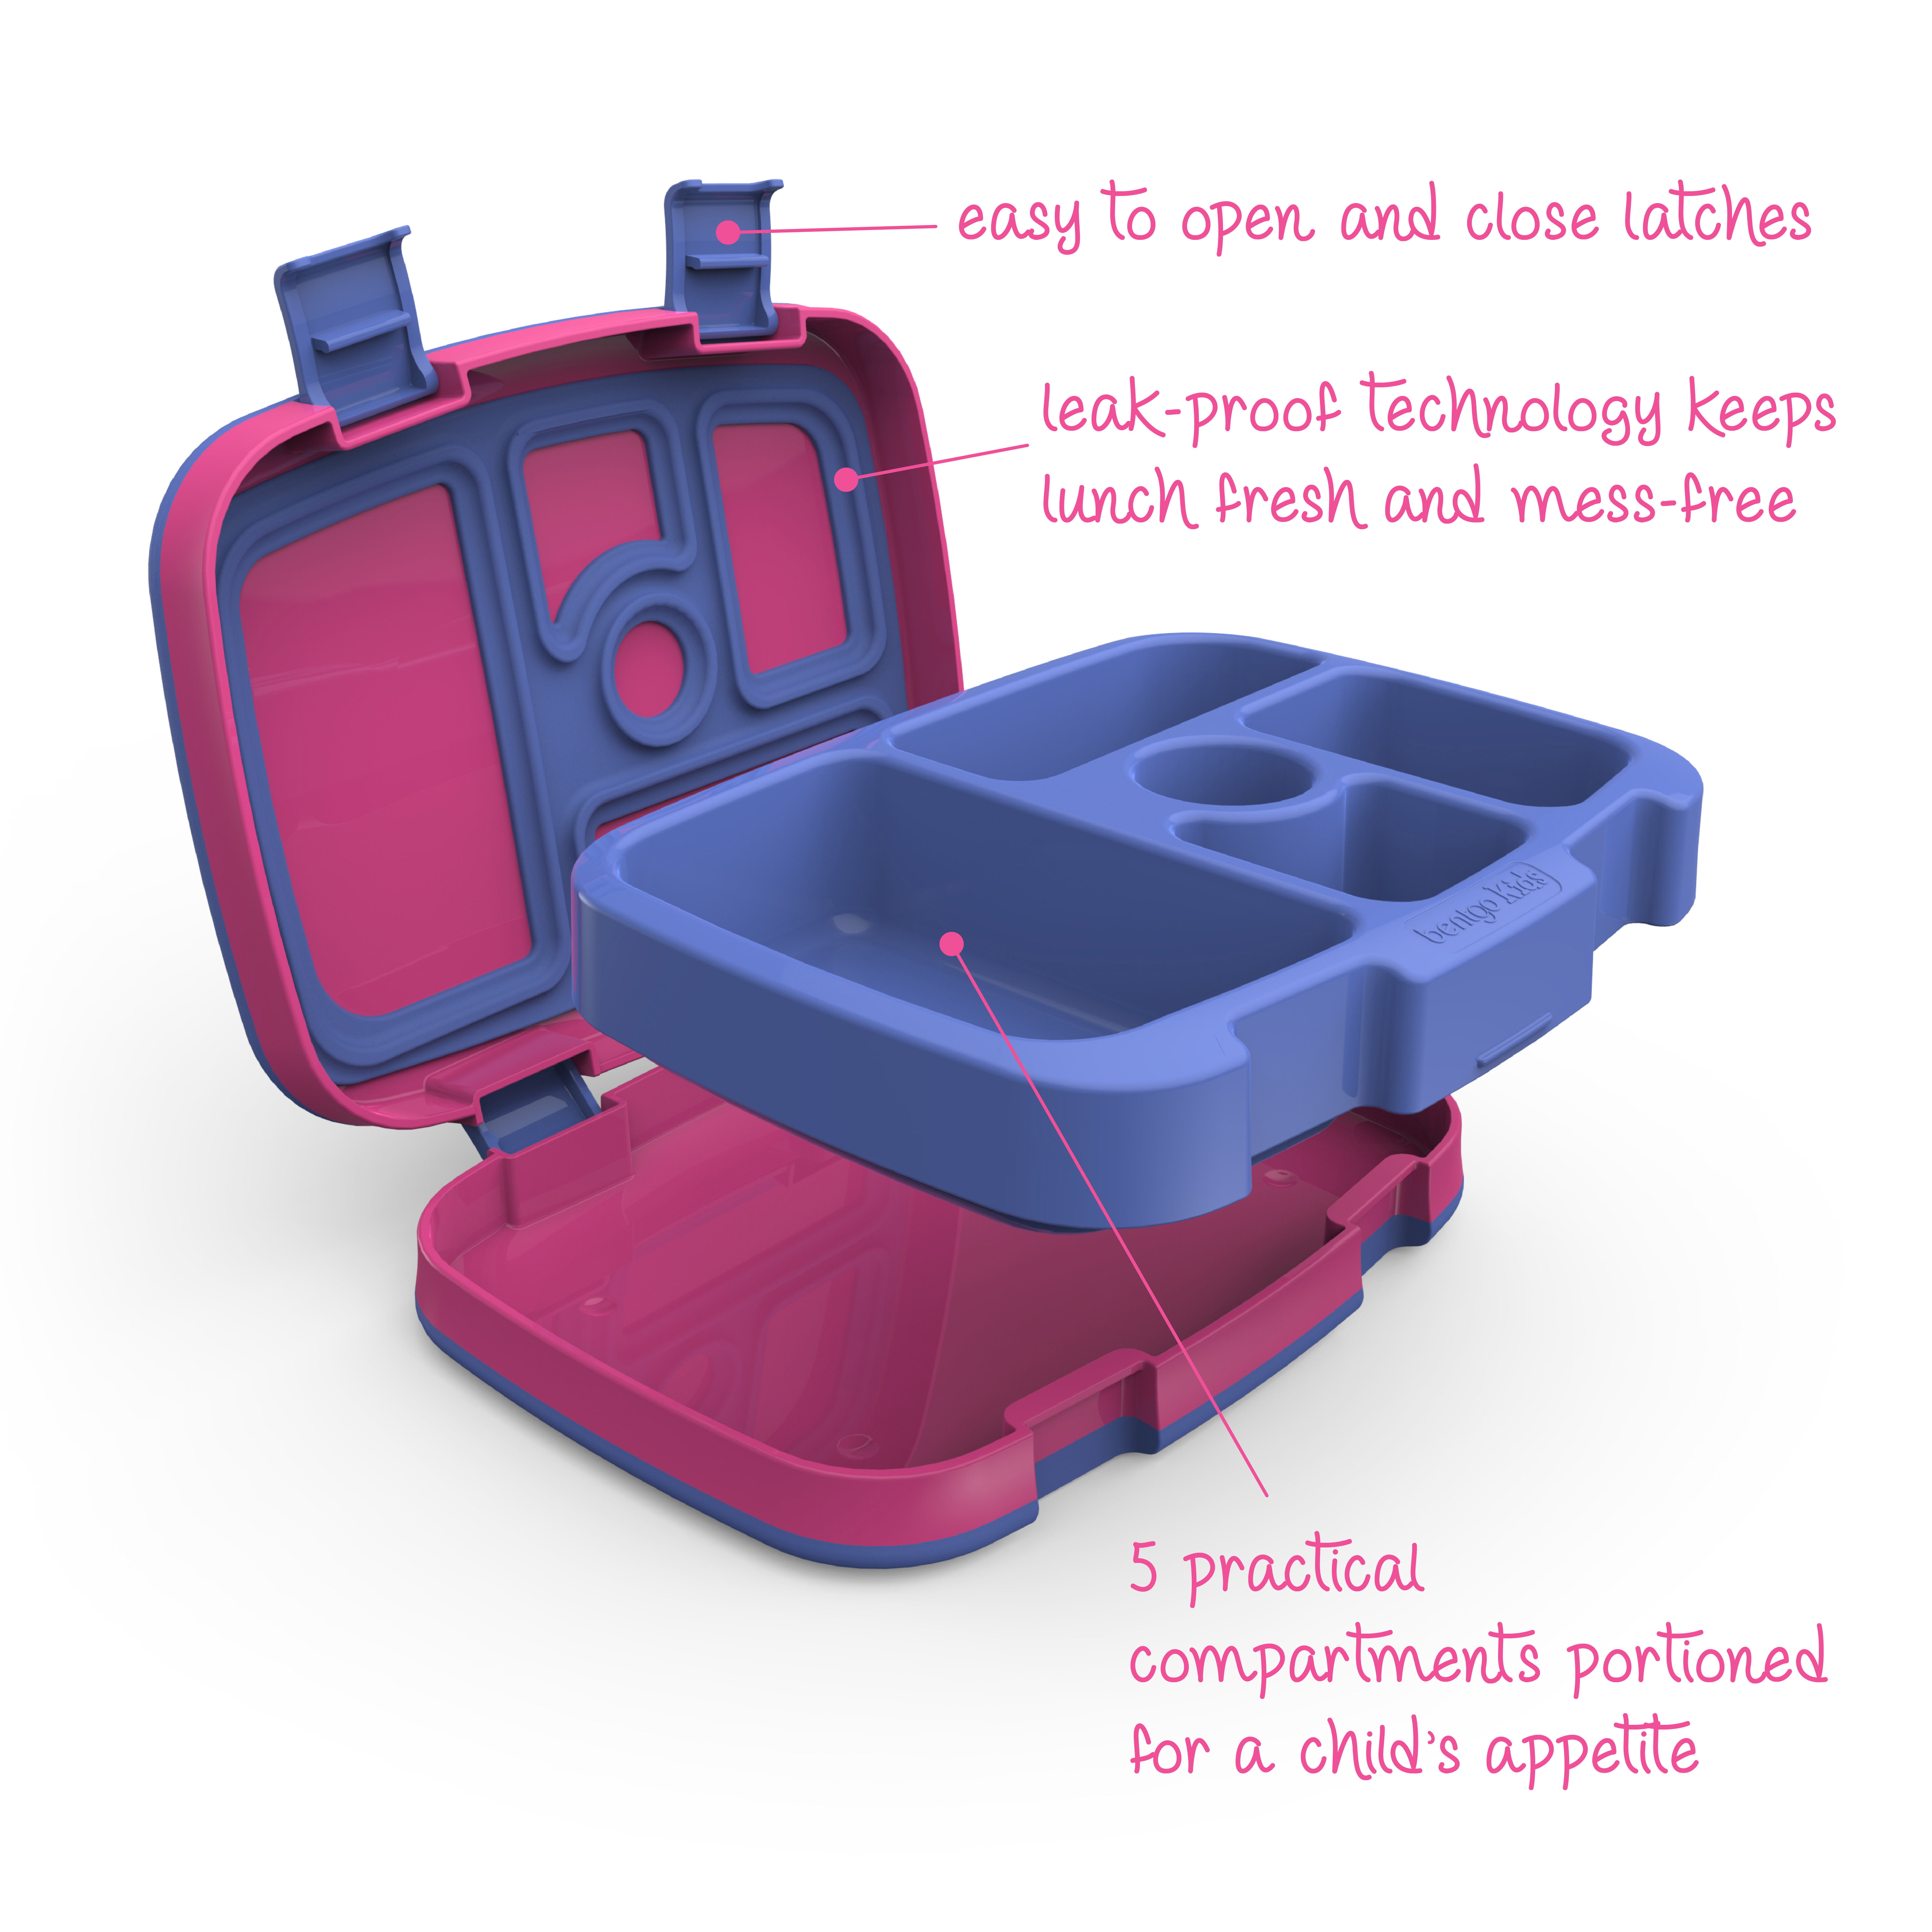  Bentgo® Kids Brights Bento-Style 5-Compartment Lunch Box -  Ideal Portion Sizes for Ages 3 to 7 - Leak-Proof, Drop-Proof, Dishwasher  Safe, BPA-Free, & Made with Food-Safe Materials (Fuchsia) : Home 